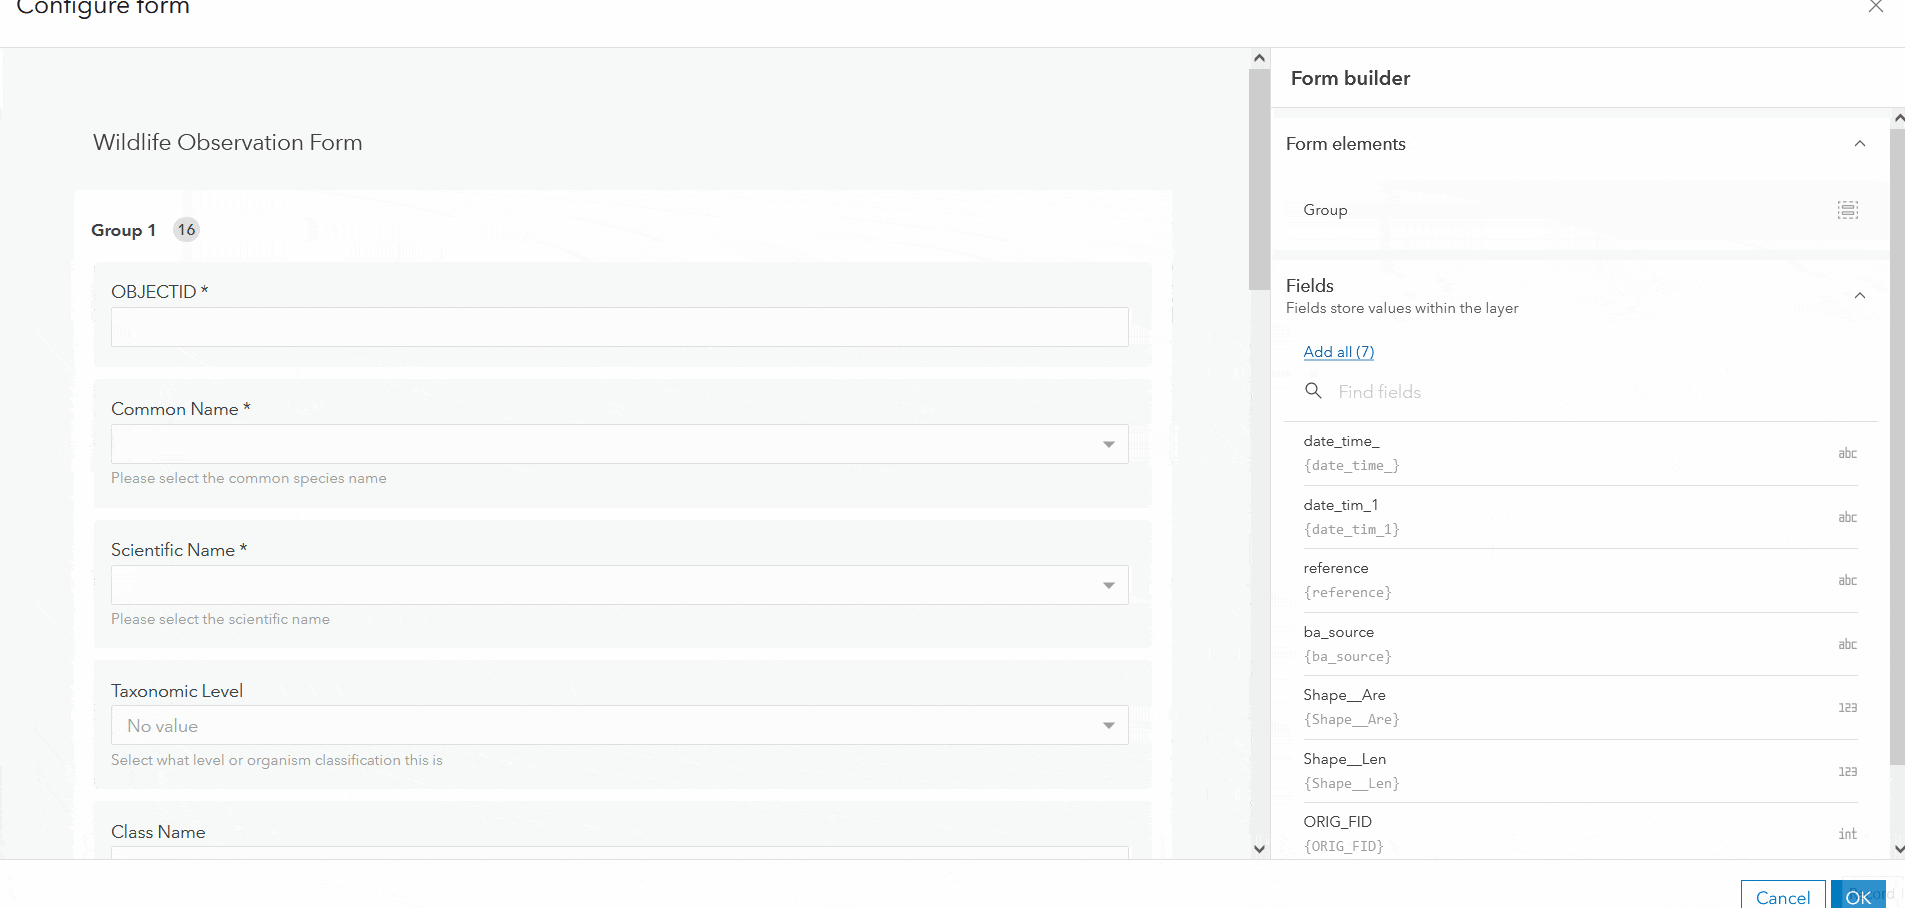 Dragging the Group element from the properties panel to into the form